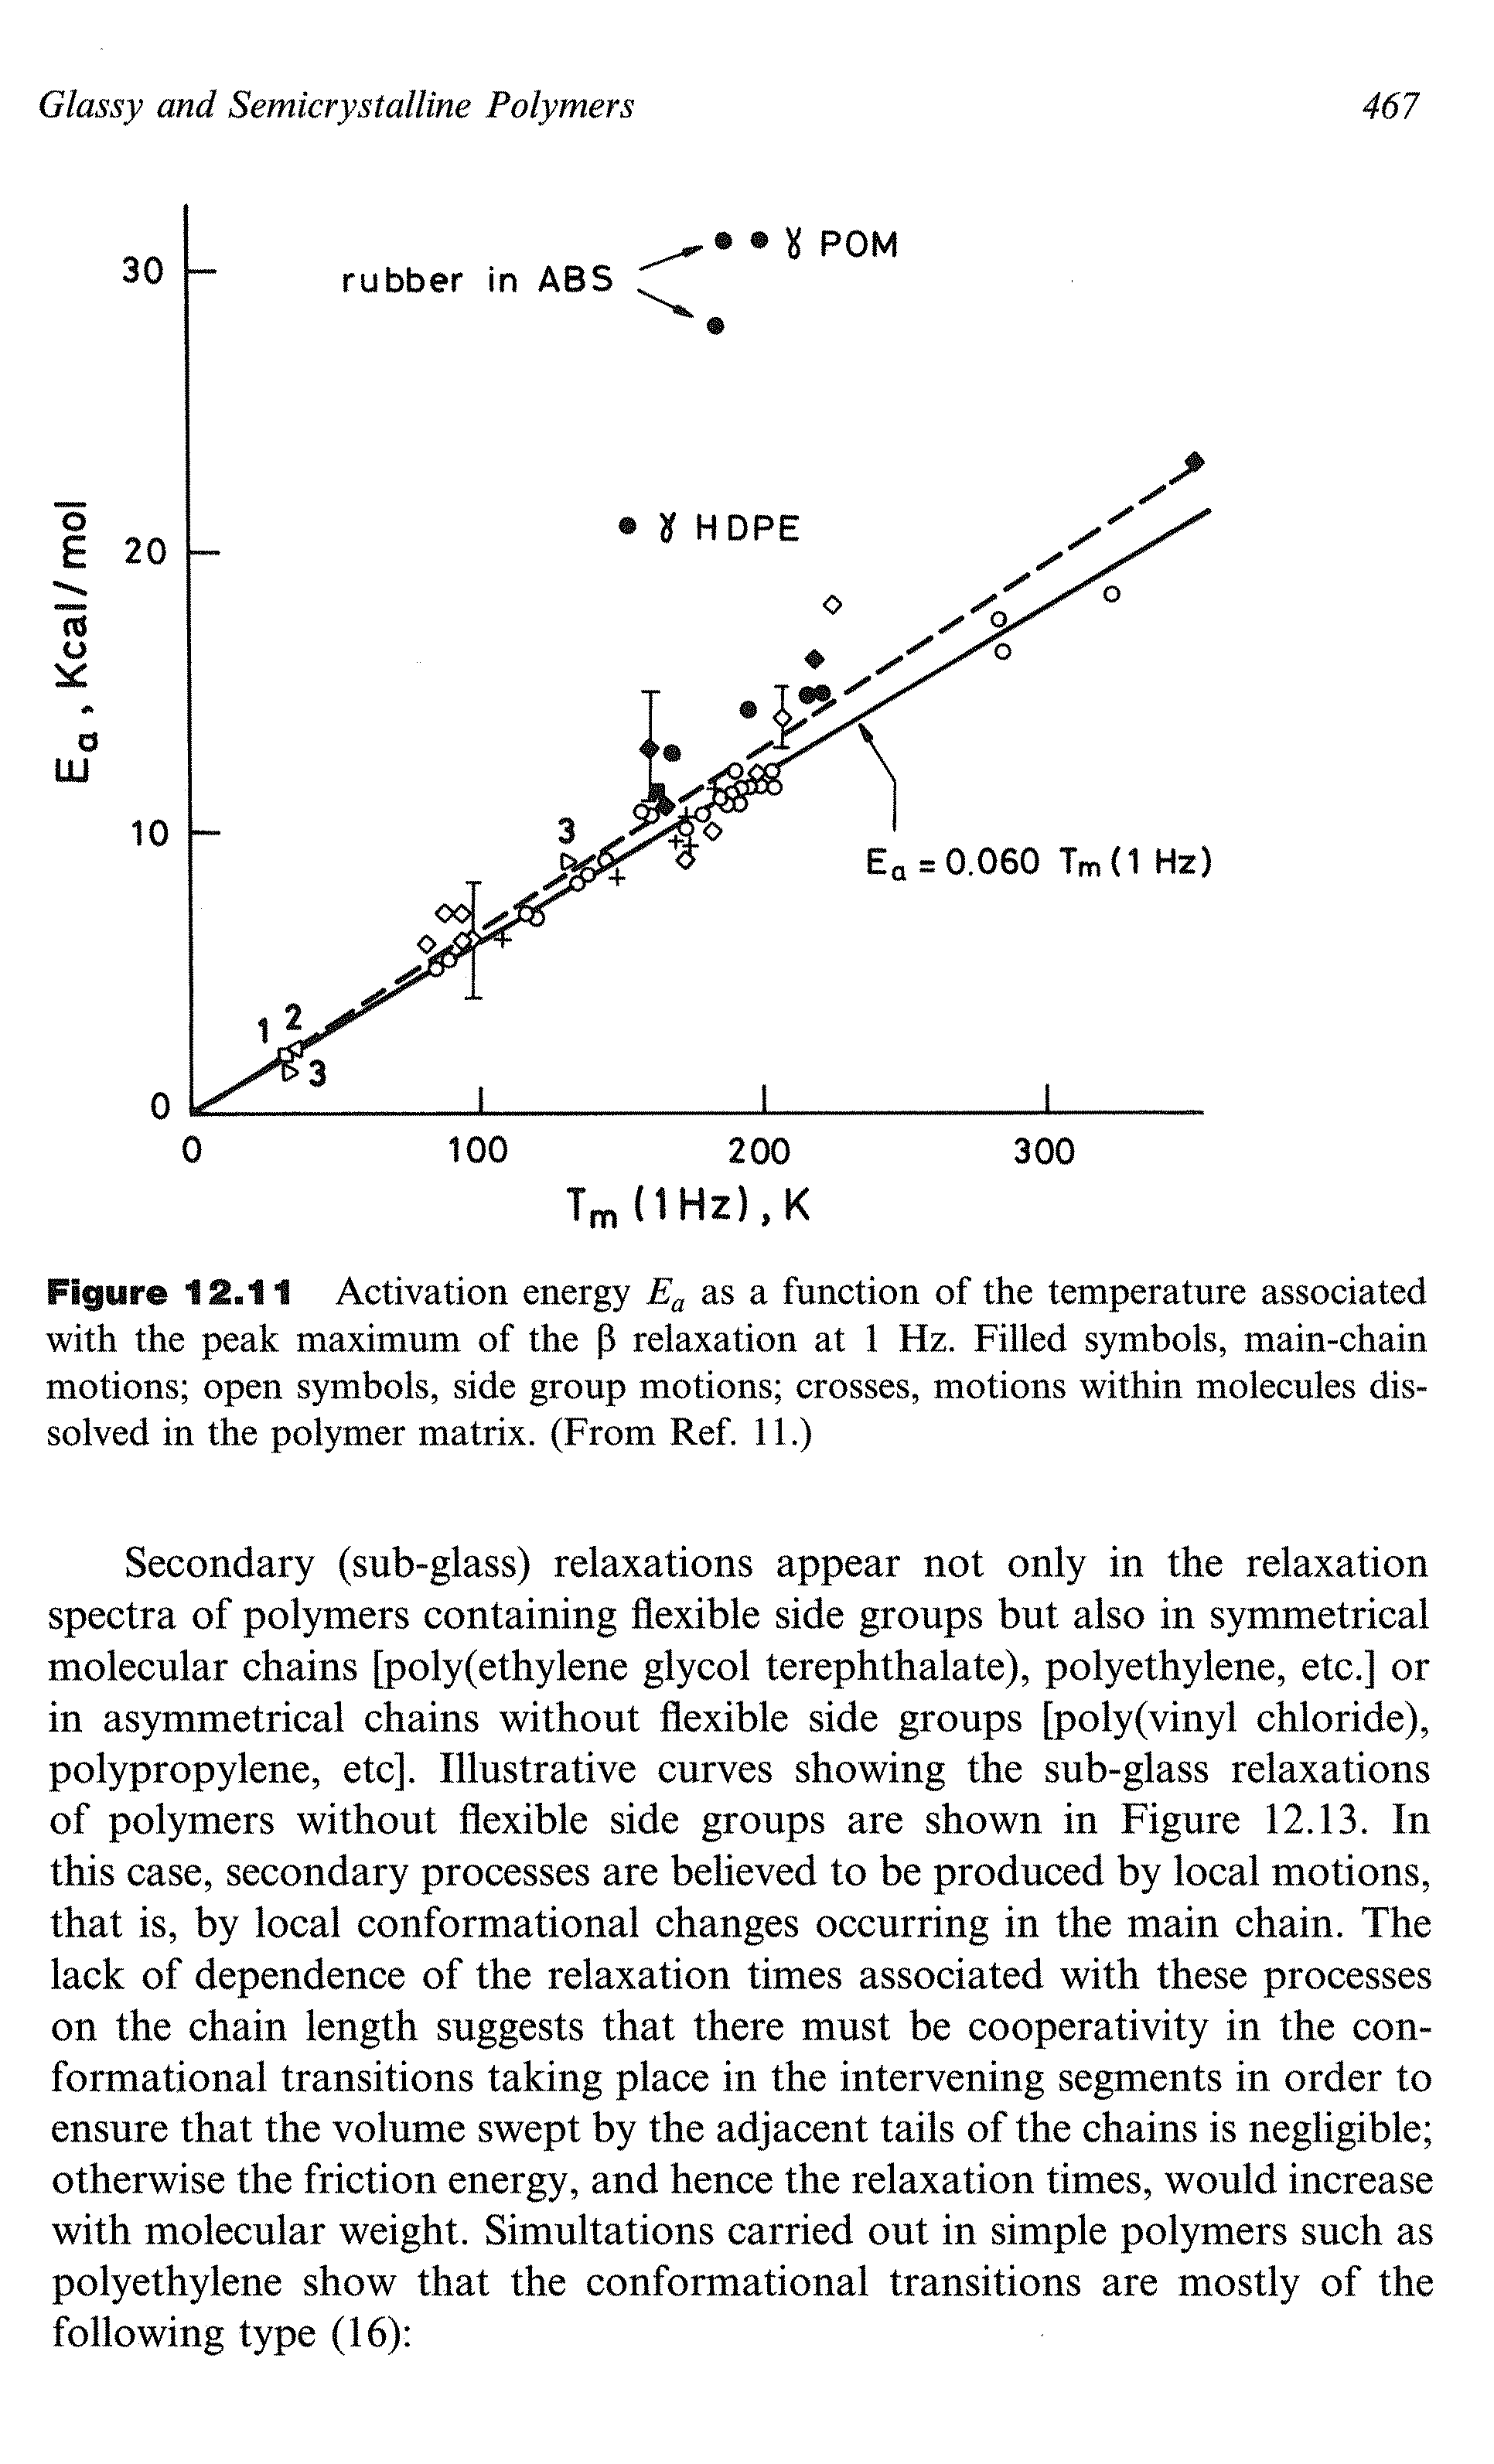 Figure 12.11 Activation energy as a function of the temperature associated with the peak maximum of the P relaxation at 1 Hz. Filled symbols, main-chain motions open symbols, side group motions crosses, motions within molecules dissolved in the polymer matrix. (From Ref. 11.)...